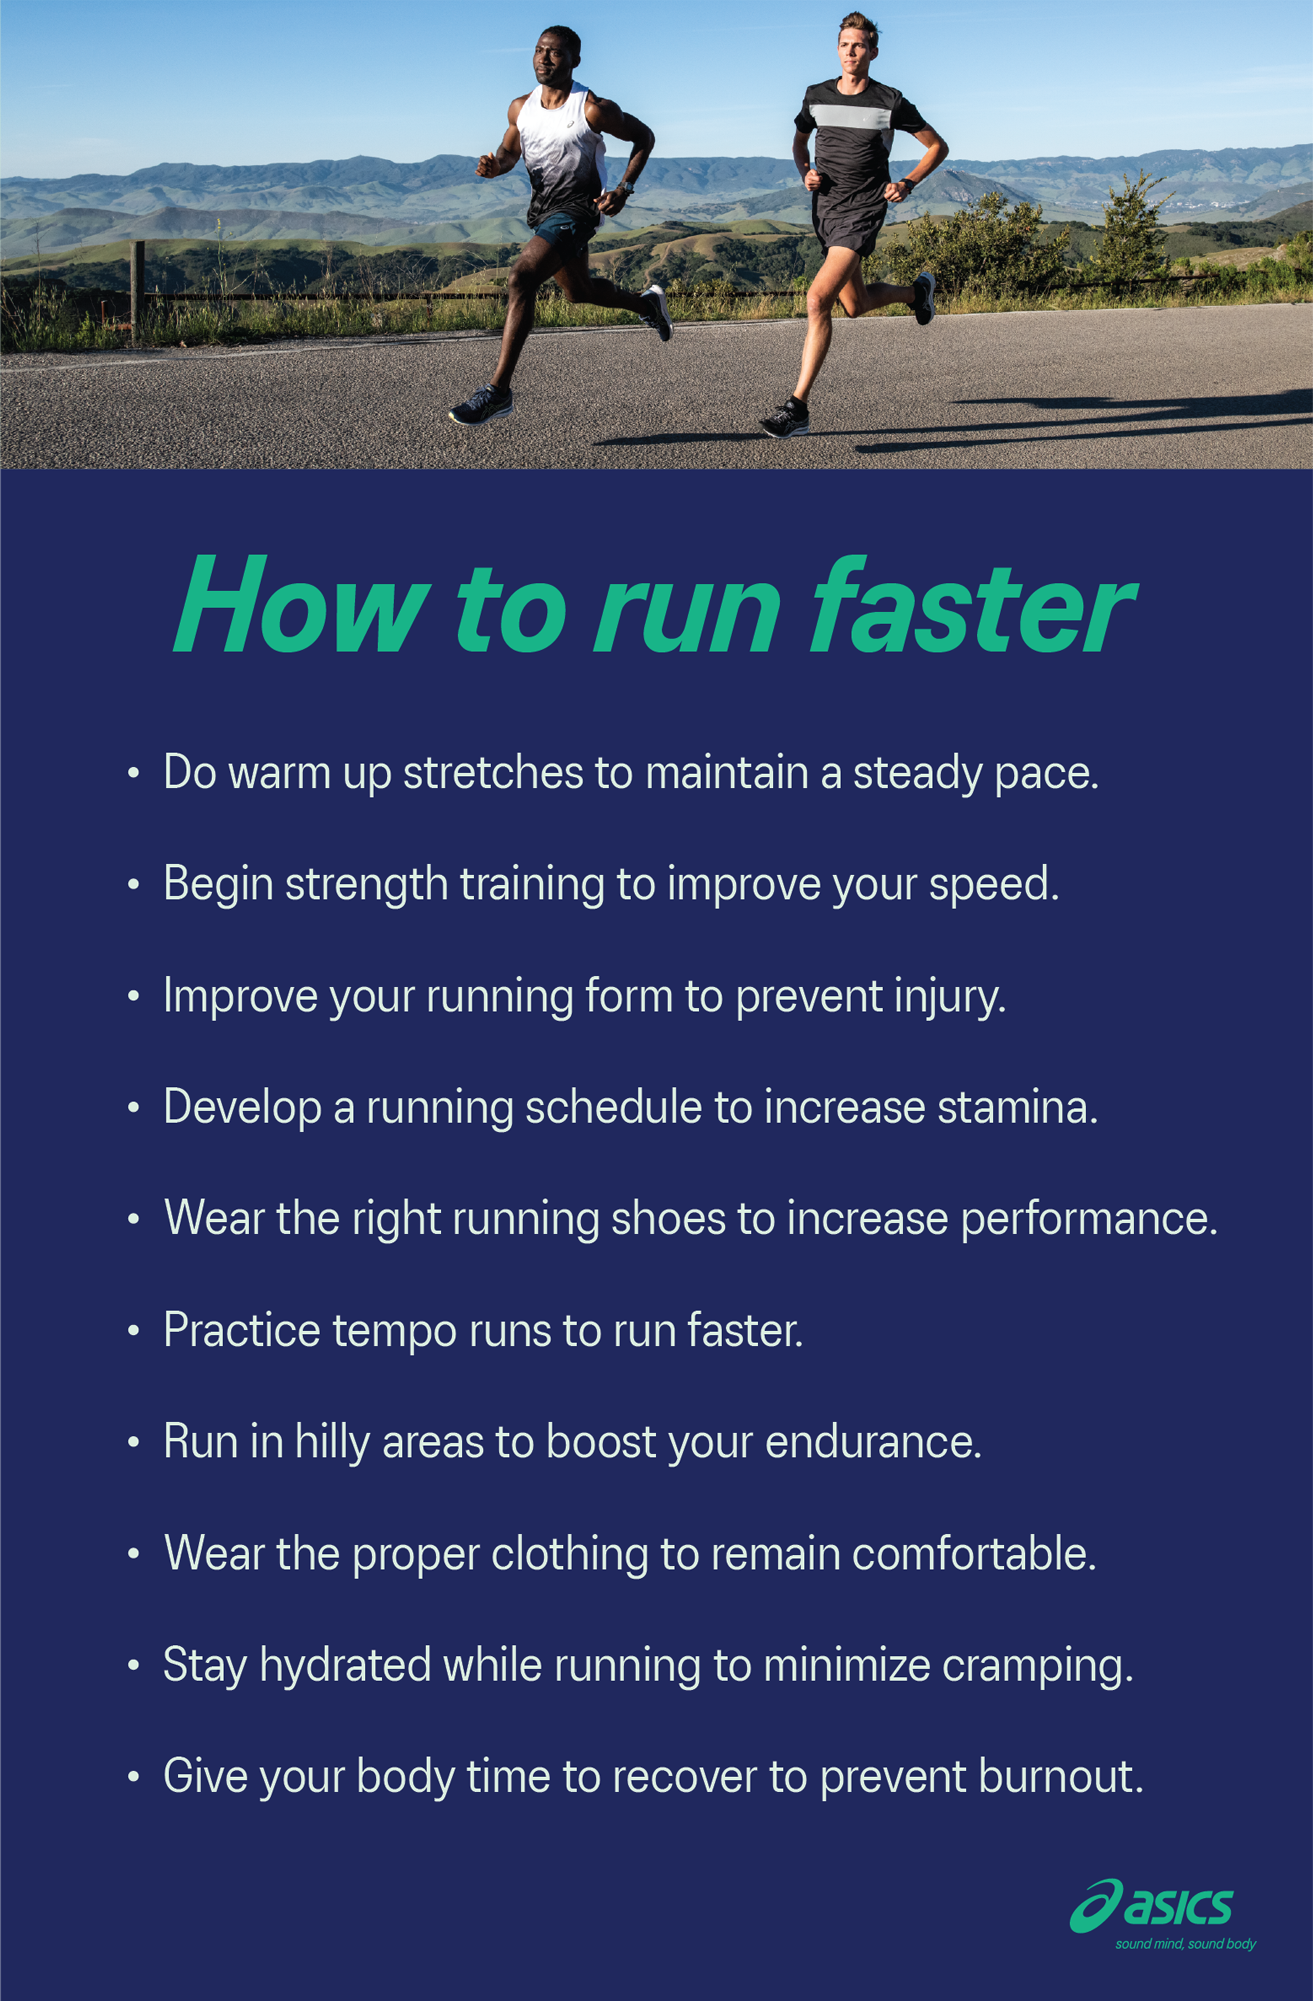 How to Get Faster at Running